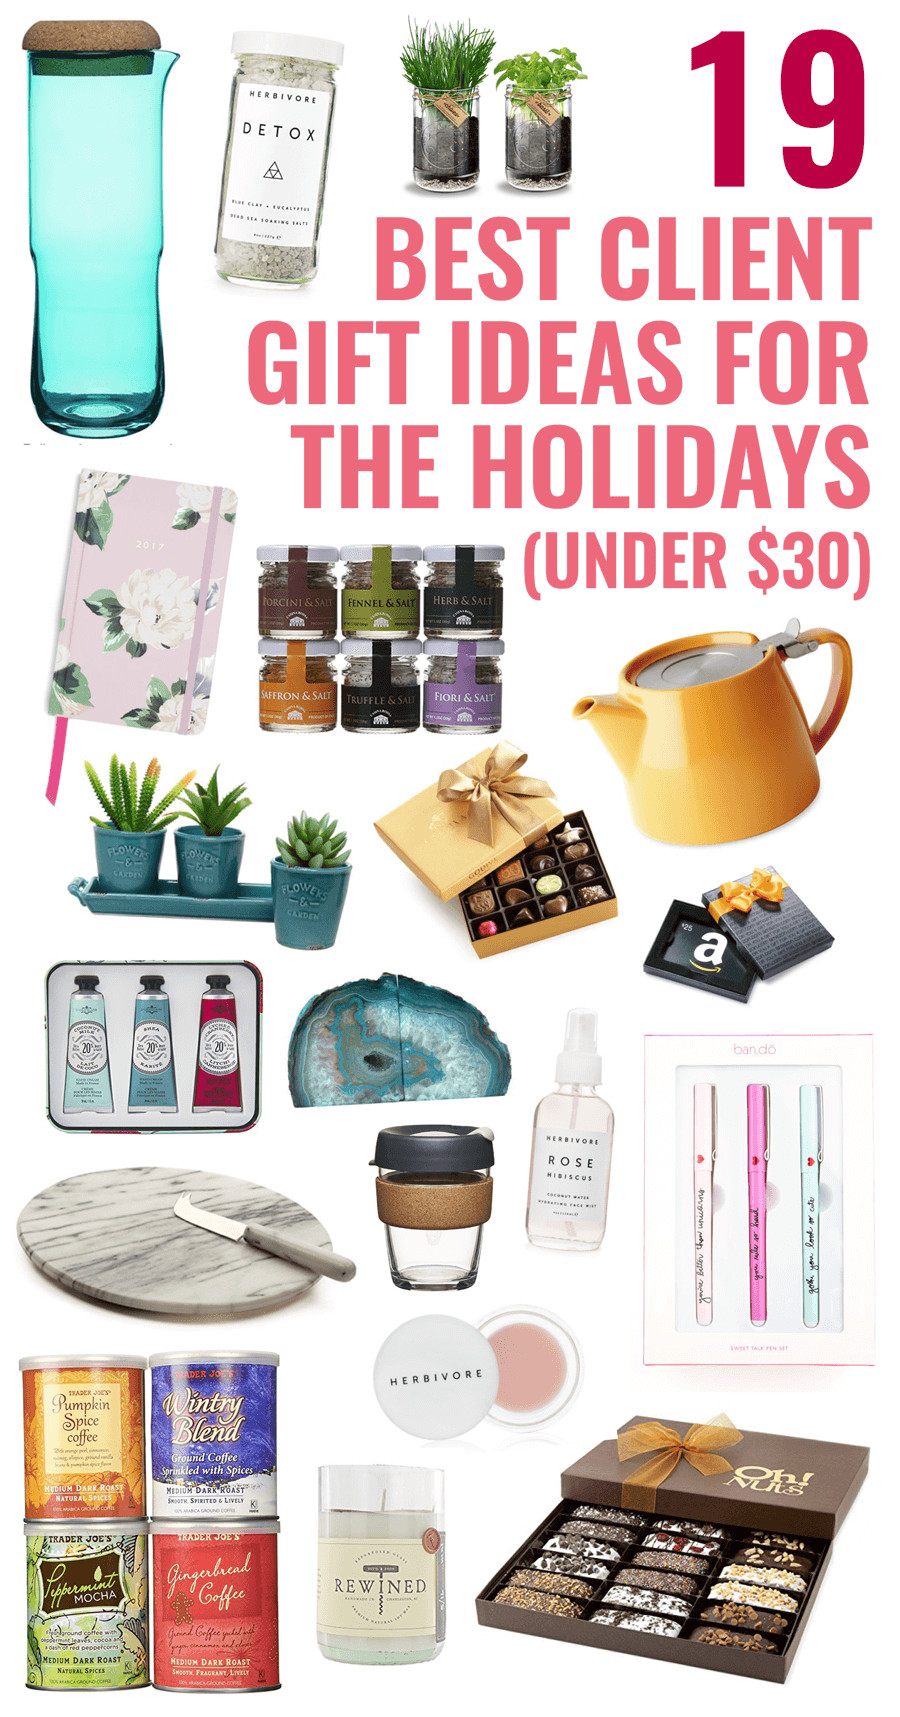 Business Holiday Gift Ideas For Clients
 19 Best Client Gift Ideas for the Holidays under $30